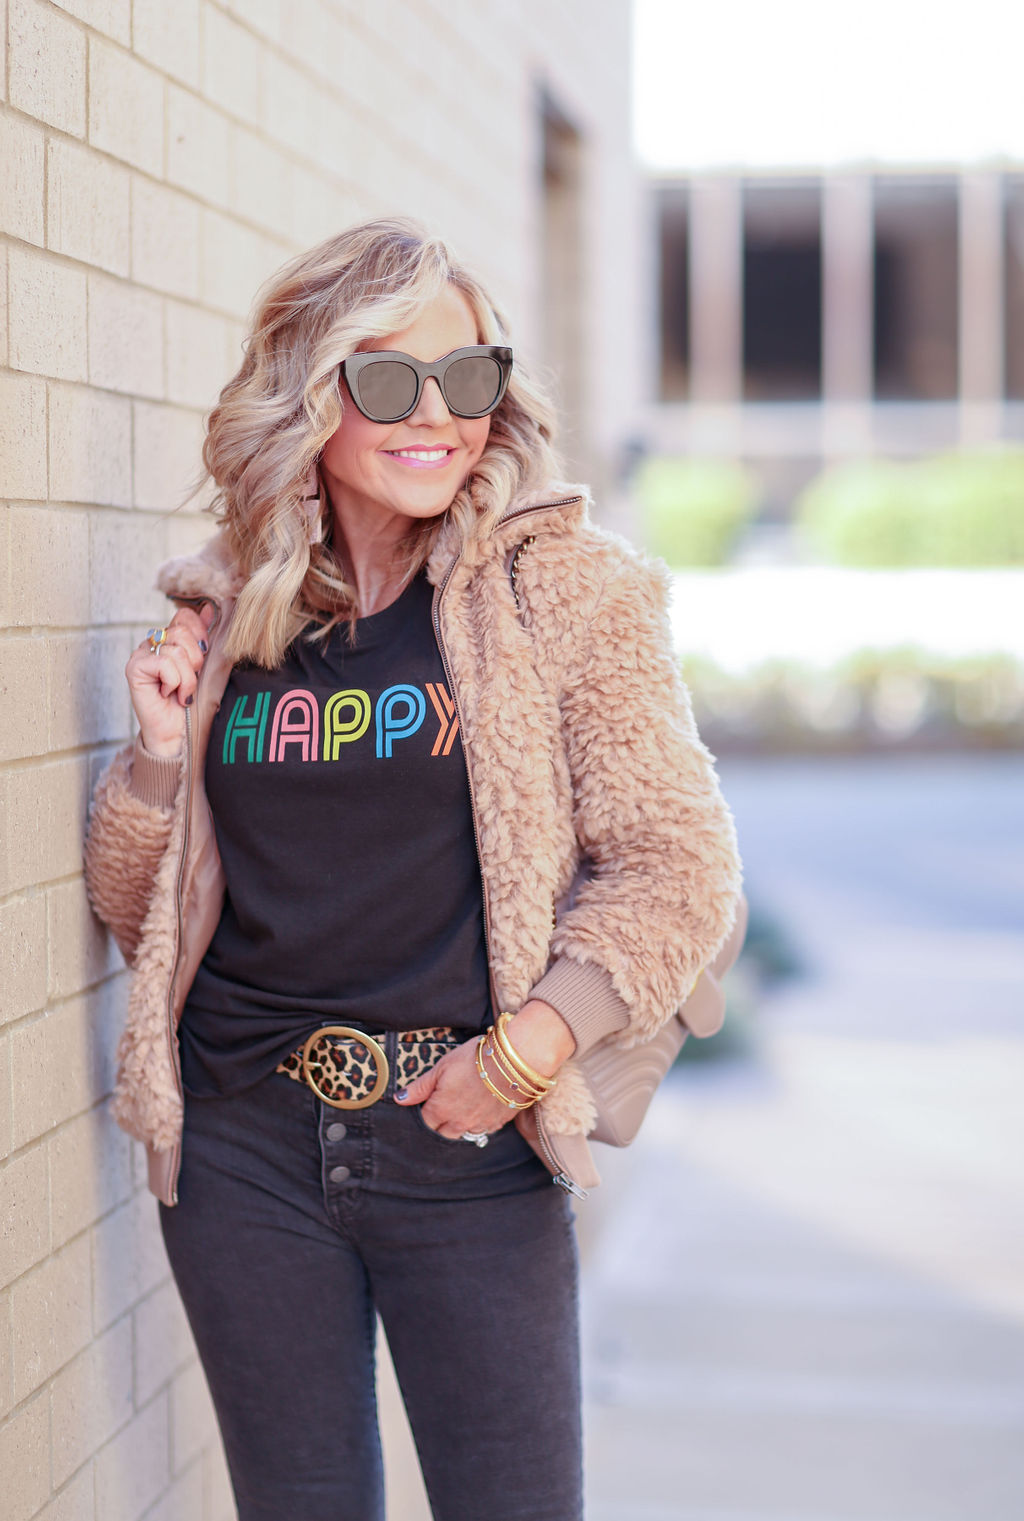 Cute Graphic Tees featured by top US fashion blog, Hello! Happiness: image of a woman wearing a Happy graphic tee